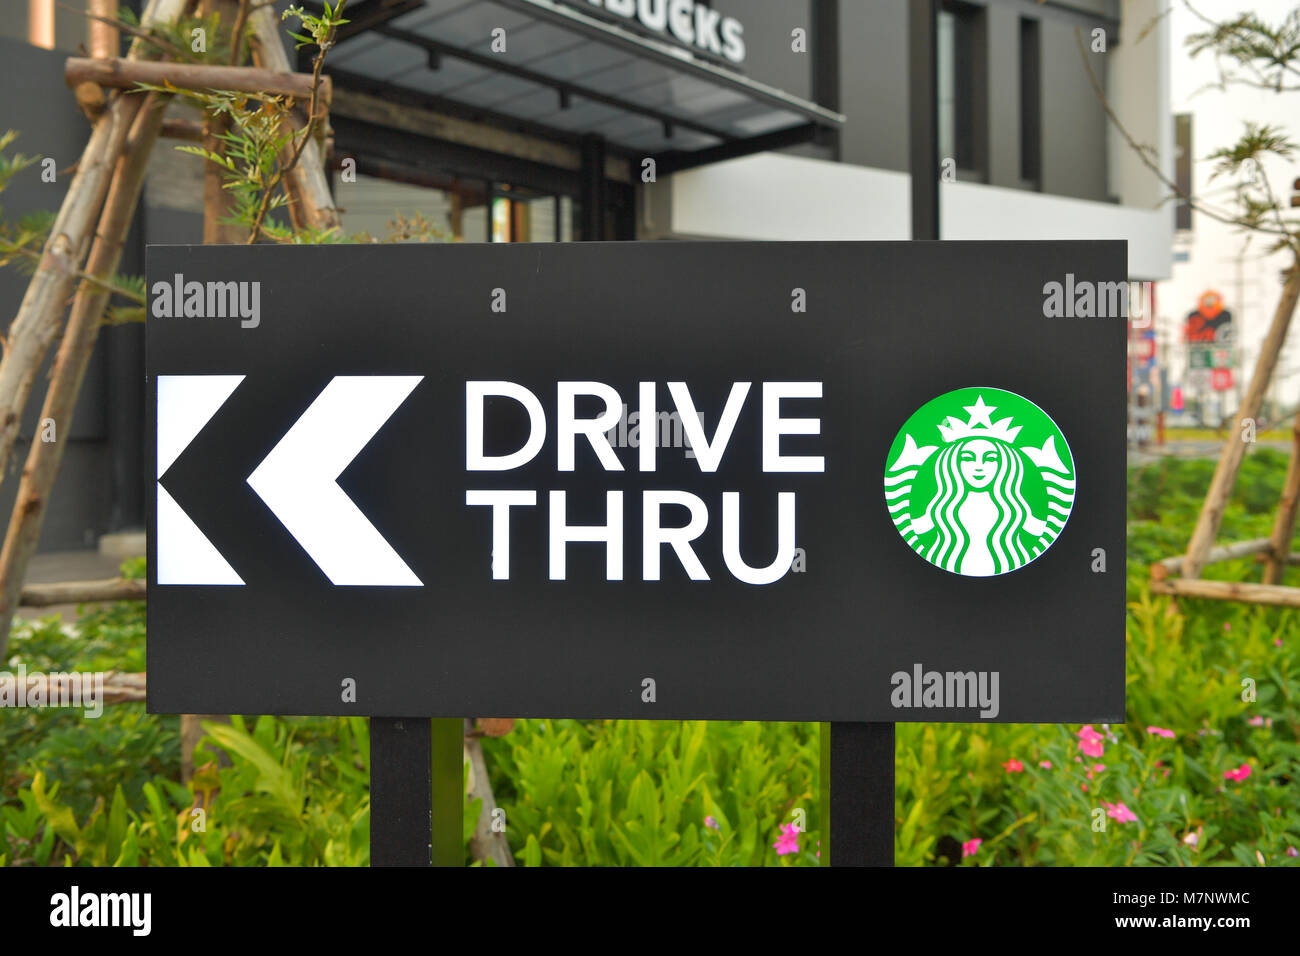 AYUTTHAYA - MARCH 11 : Starbucks Coffee in Thailand, Corporation is An American global coffee company and coffeehouse, during the day hours on March 11, 2018, Ayutthaya Thailand. Stock Photo